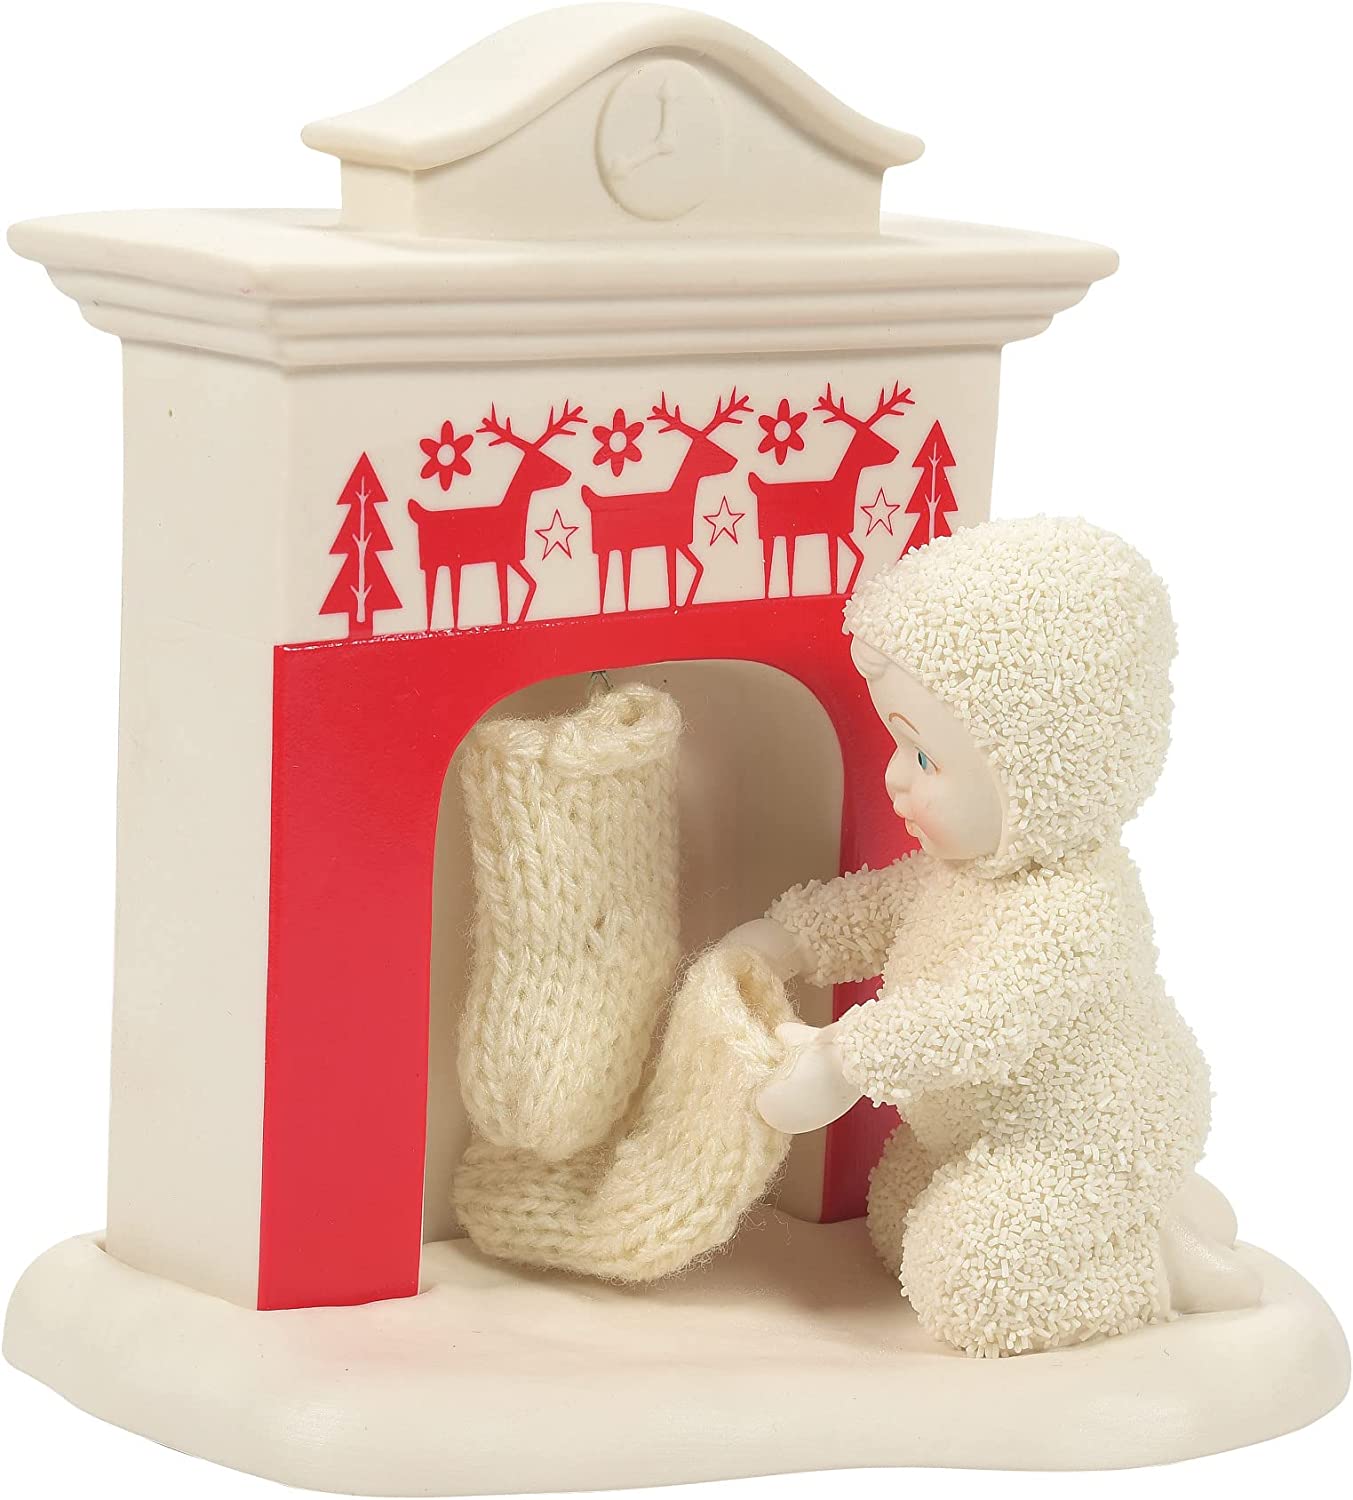 Department 56 Snowbabies Christmas Memories Hung by The Chimney with Care Figurine